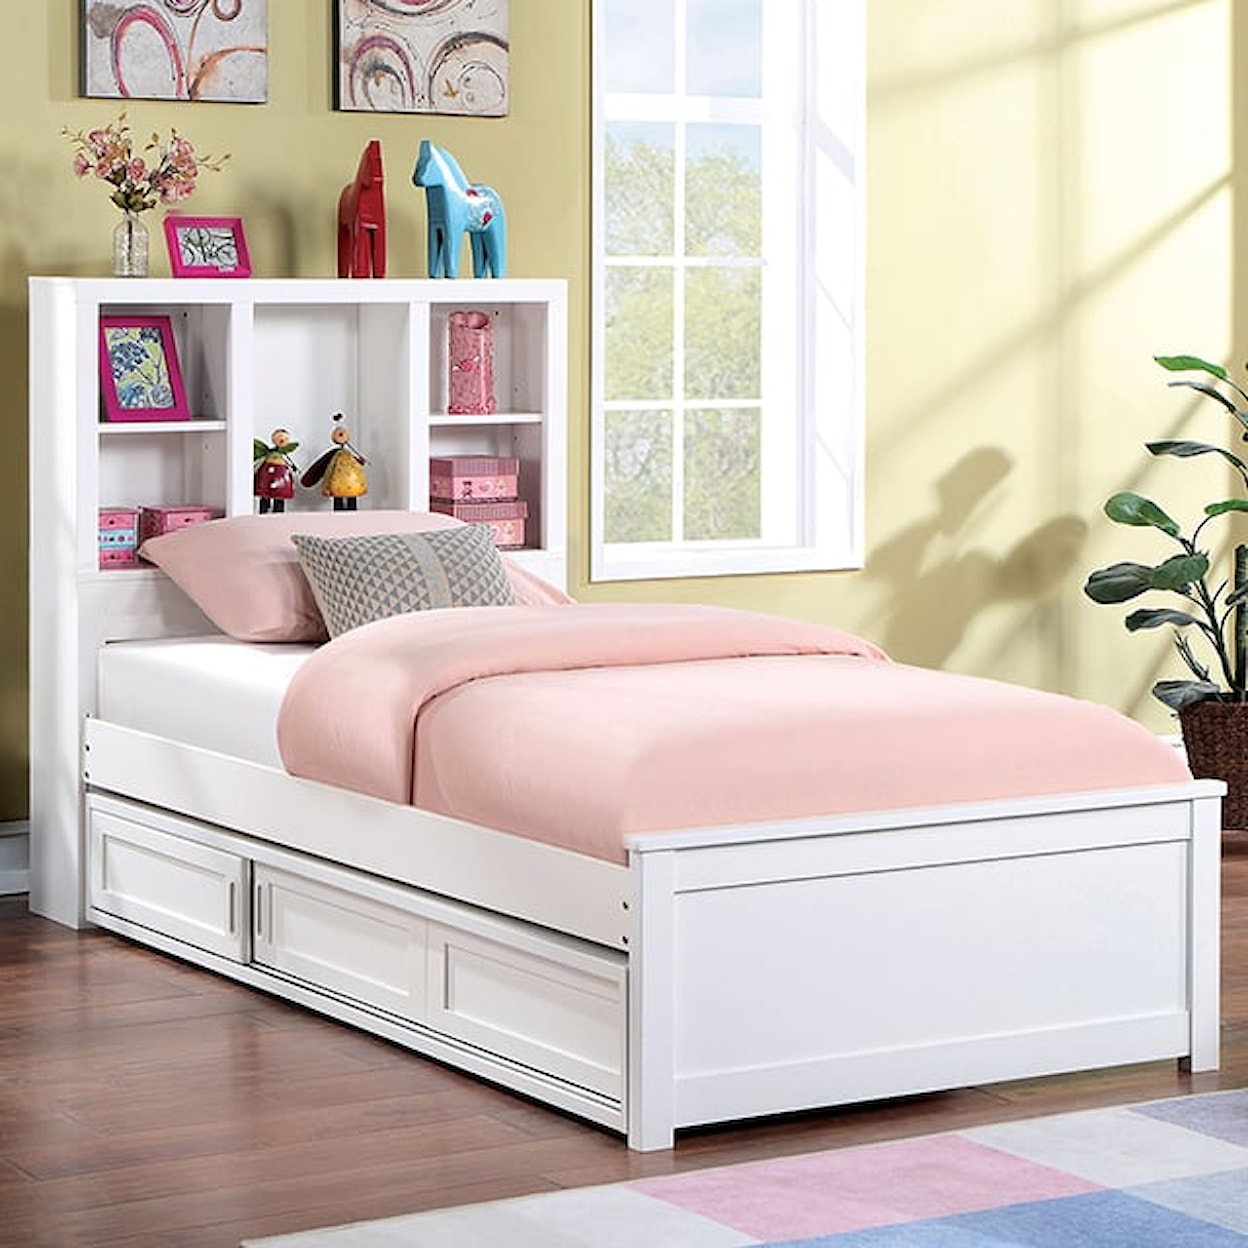 Furniture of America Marilla Youth Full Bed with Bookcase Headboard